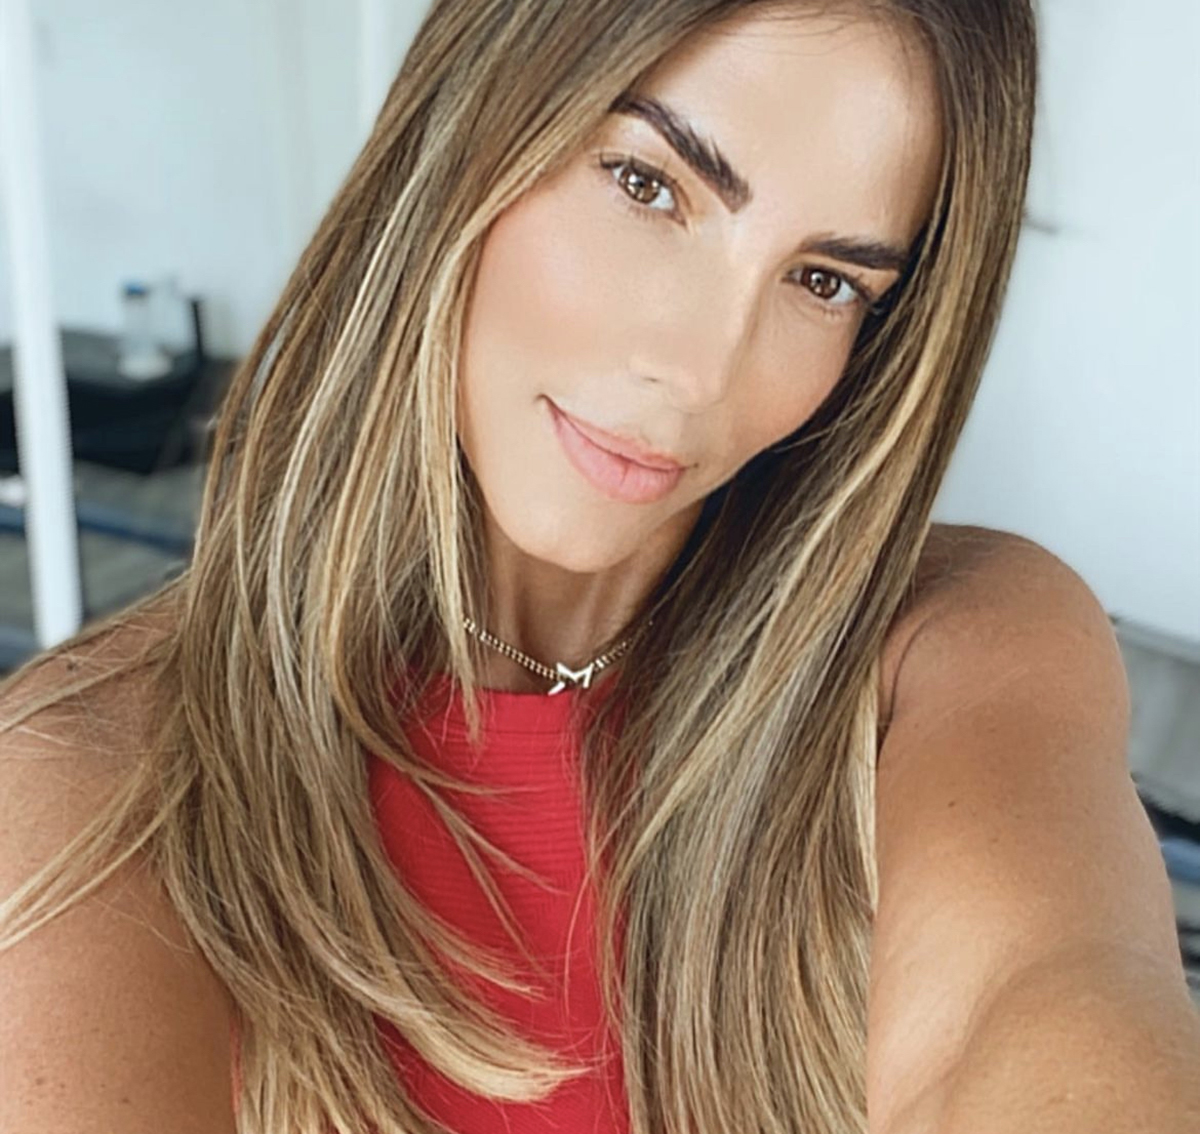 Gaby Espino breaks the silence: She assures that Aleska Génesis and her sisters hired a hacker to harm her